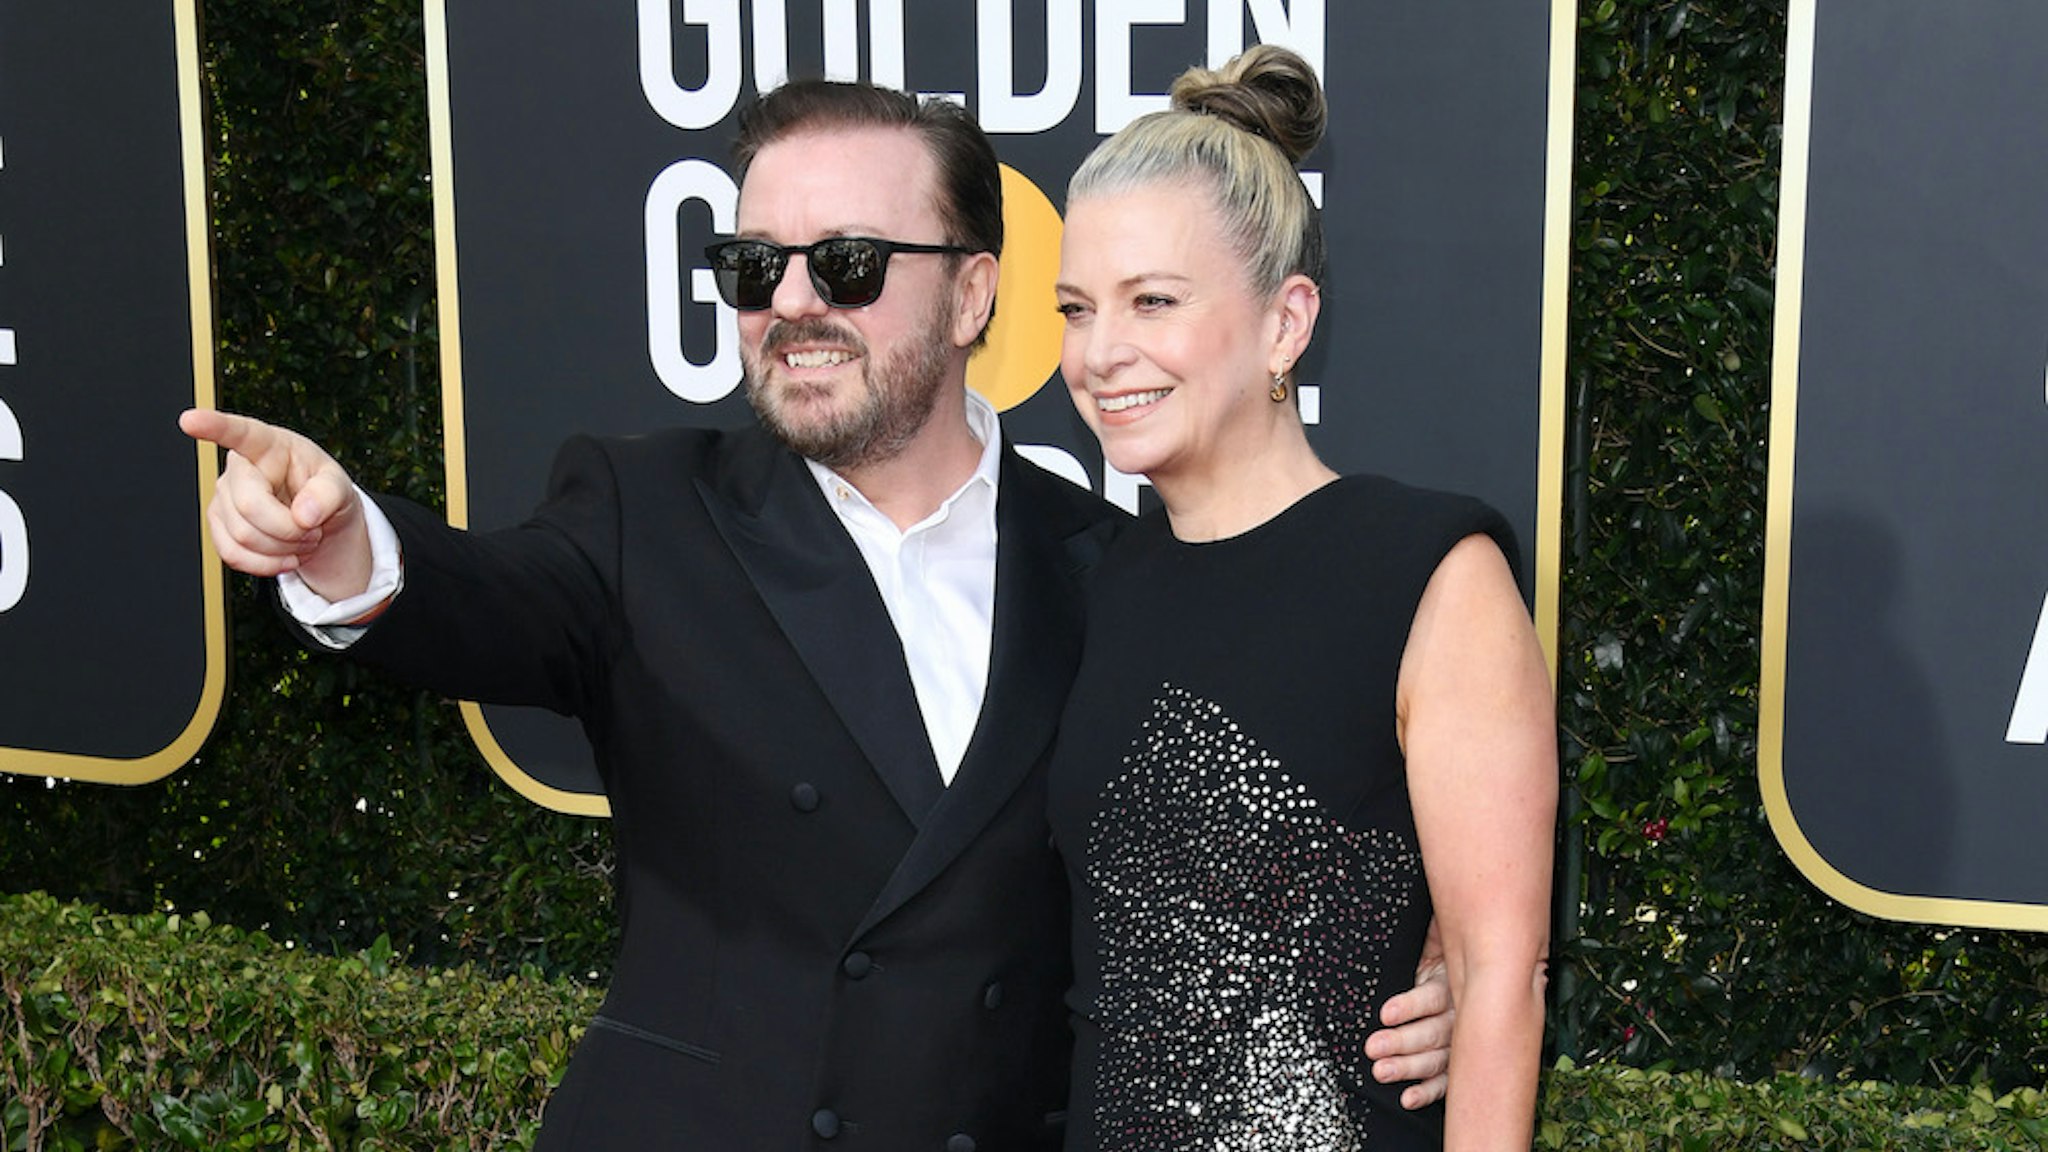 Ricky Gervais and Jane Fallon attend the 77th Annual Golden Globe Awards at The Beverly Hilton Hotel on January 05, 2020 in Beverly Hills, California. (Photo by Daniele Venturelli/WireImage)